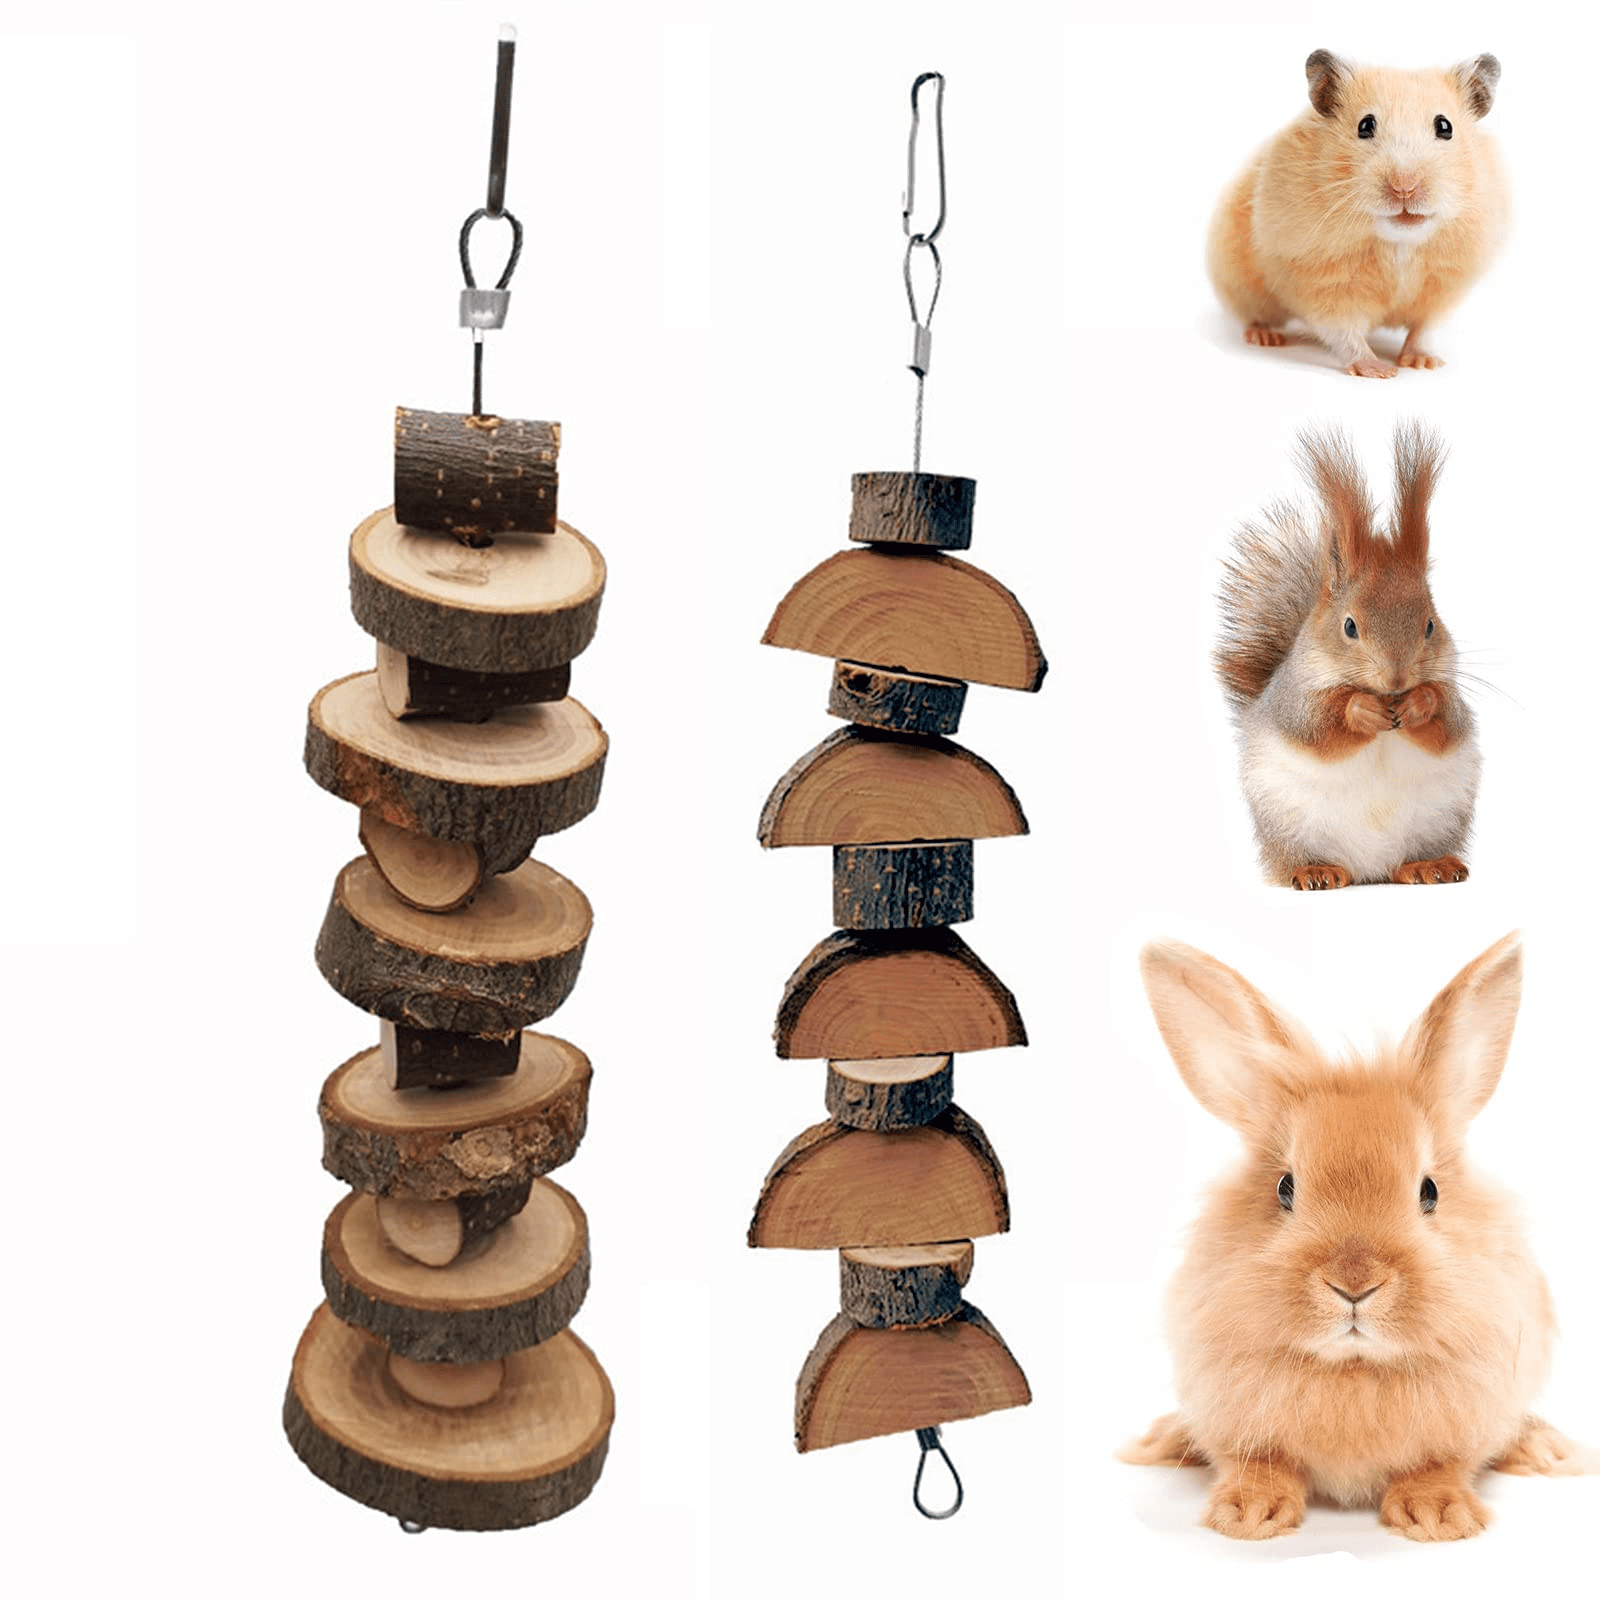 Guinea Pigs Hamster Chew Toys Birds and Other Small Rodents Exercise and Chew Teeth Care Toys. Hamsters Chinchillas Gerbils Bunnies 10 Pack Natural Wooden Squirrels 